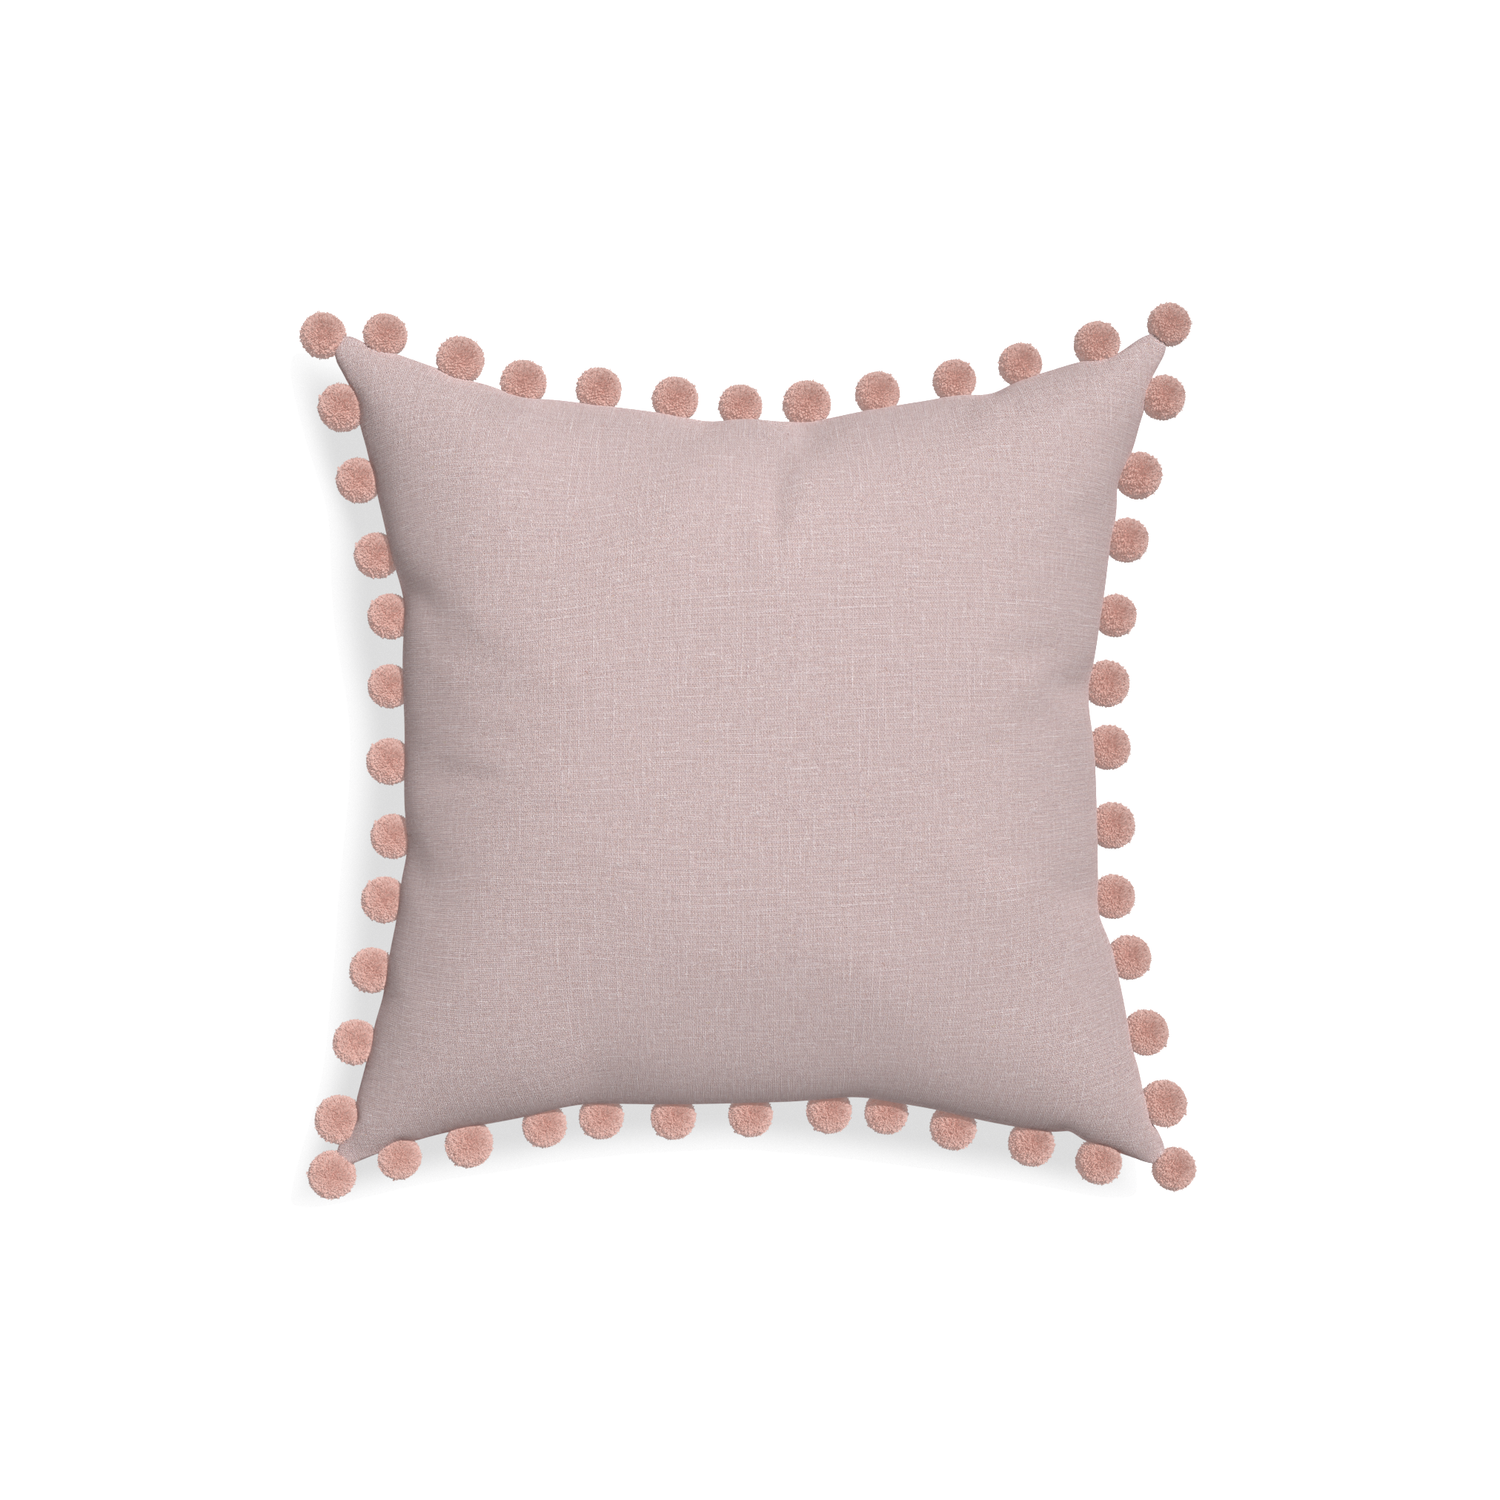 18-square orchid custom mauve pinkpillow with rose pom pom on white background